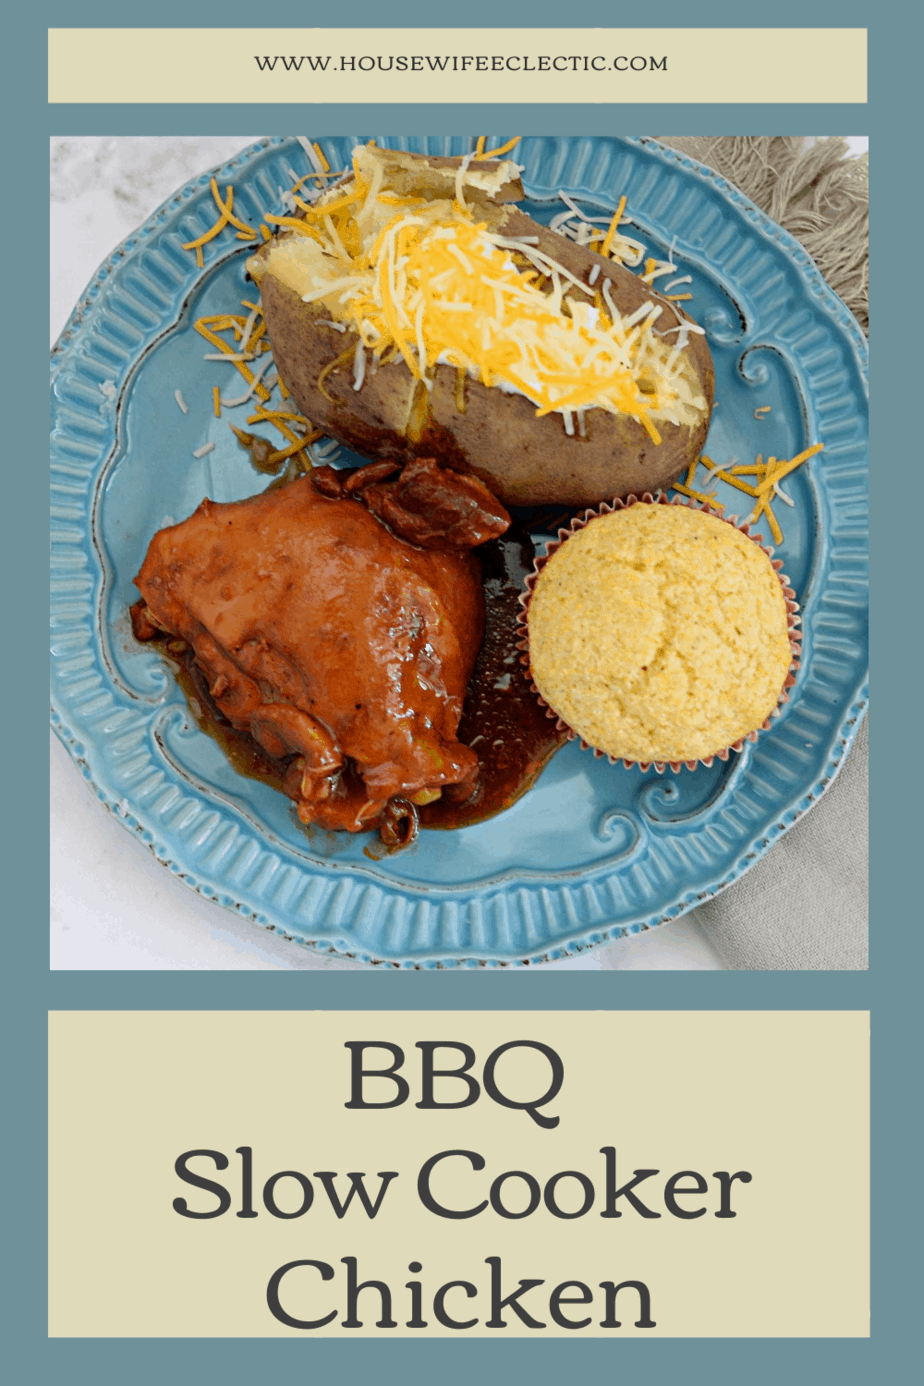 Housewife Eclectic: BBQ Slow Cooker Chicken